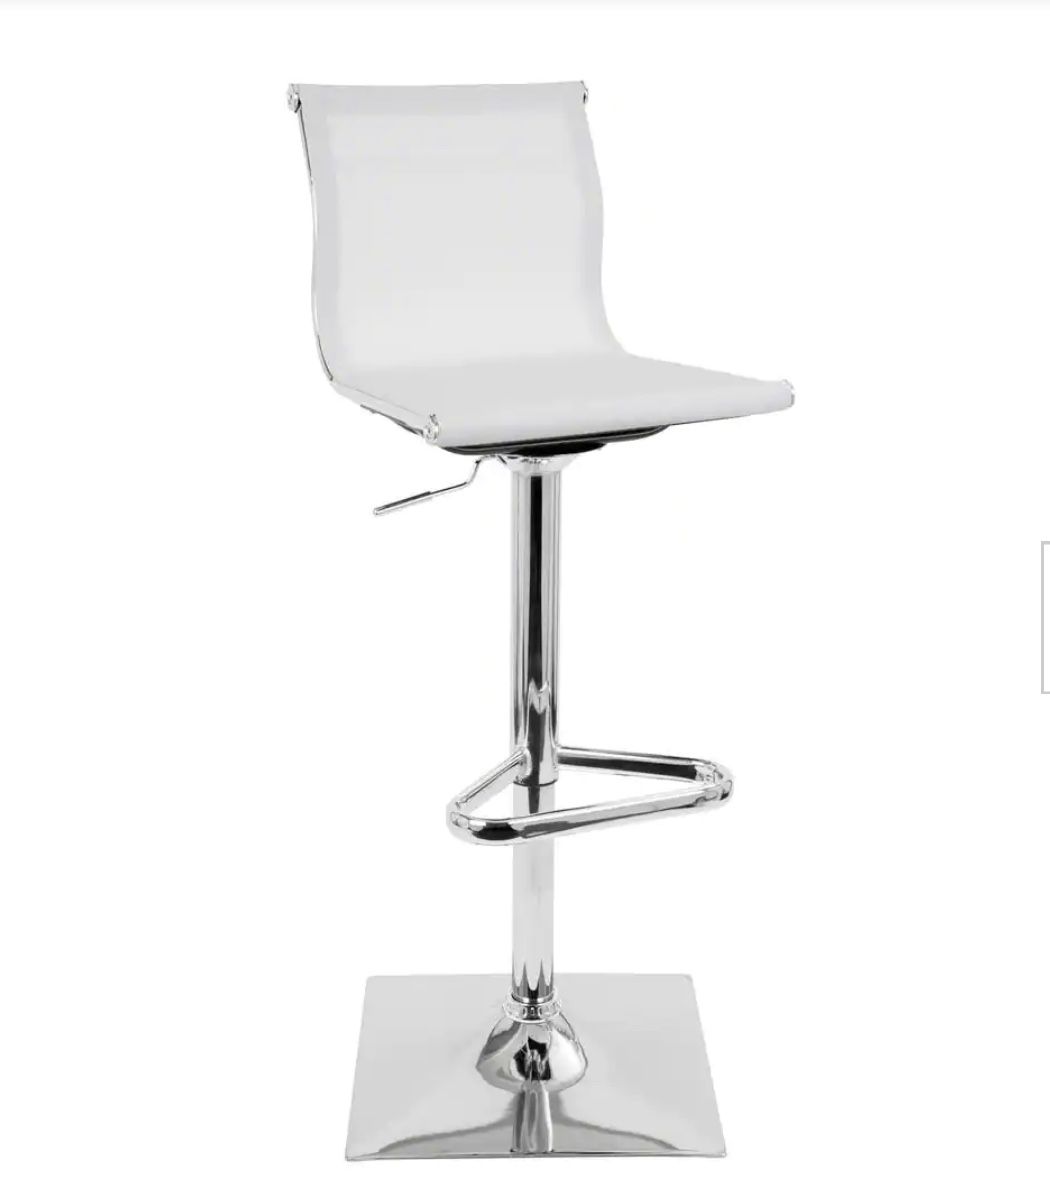 Set of 2 new in box Mirage White Adjustable Height Bar Stool (retail $240)